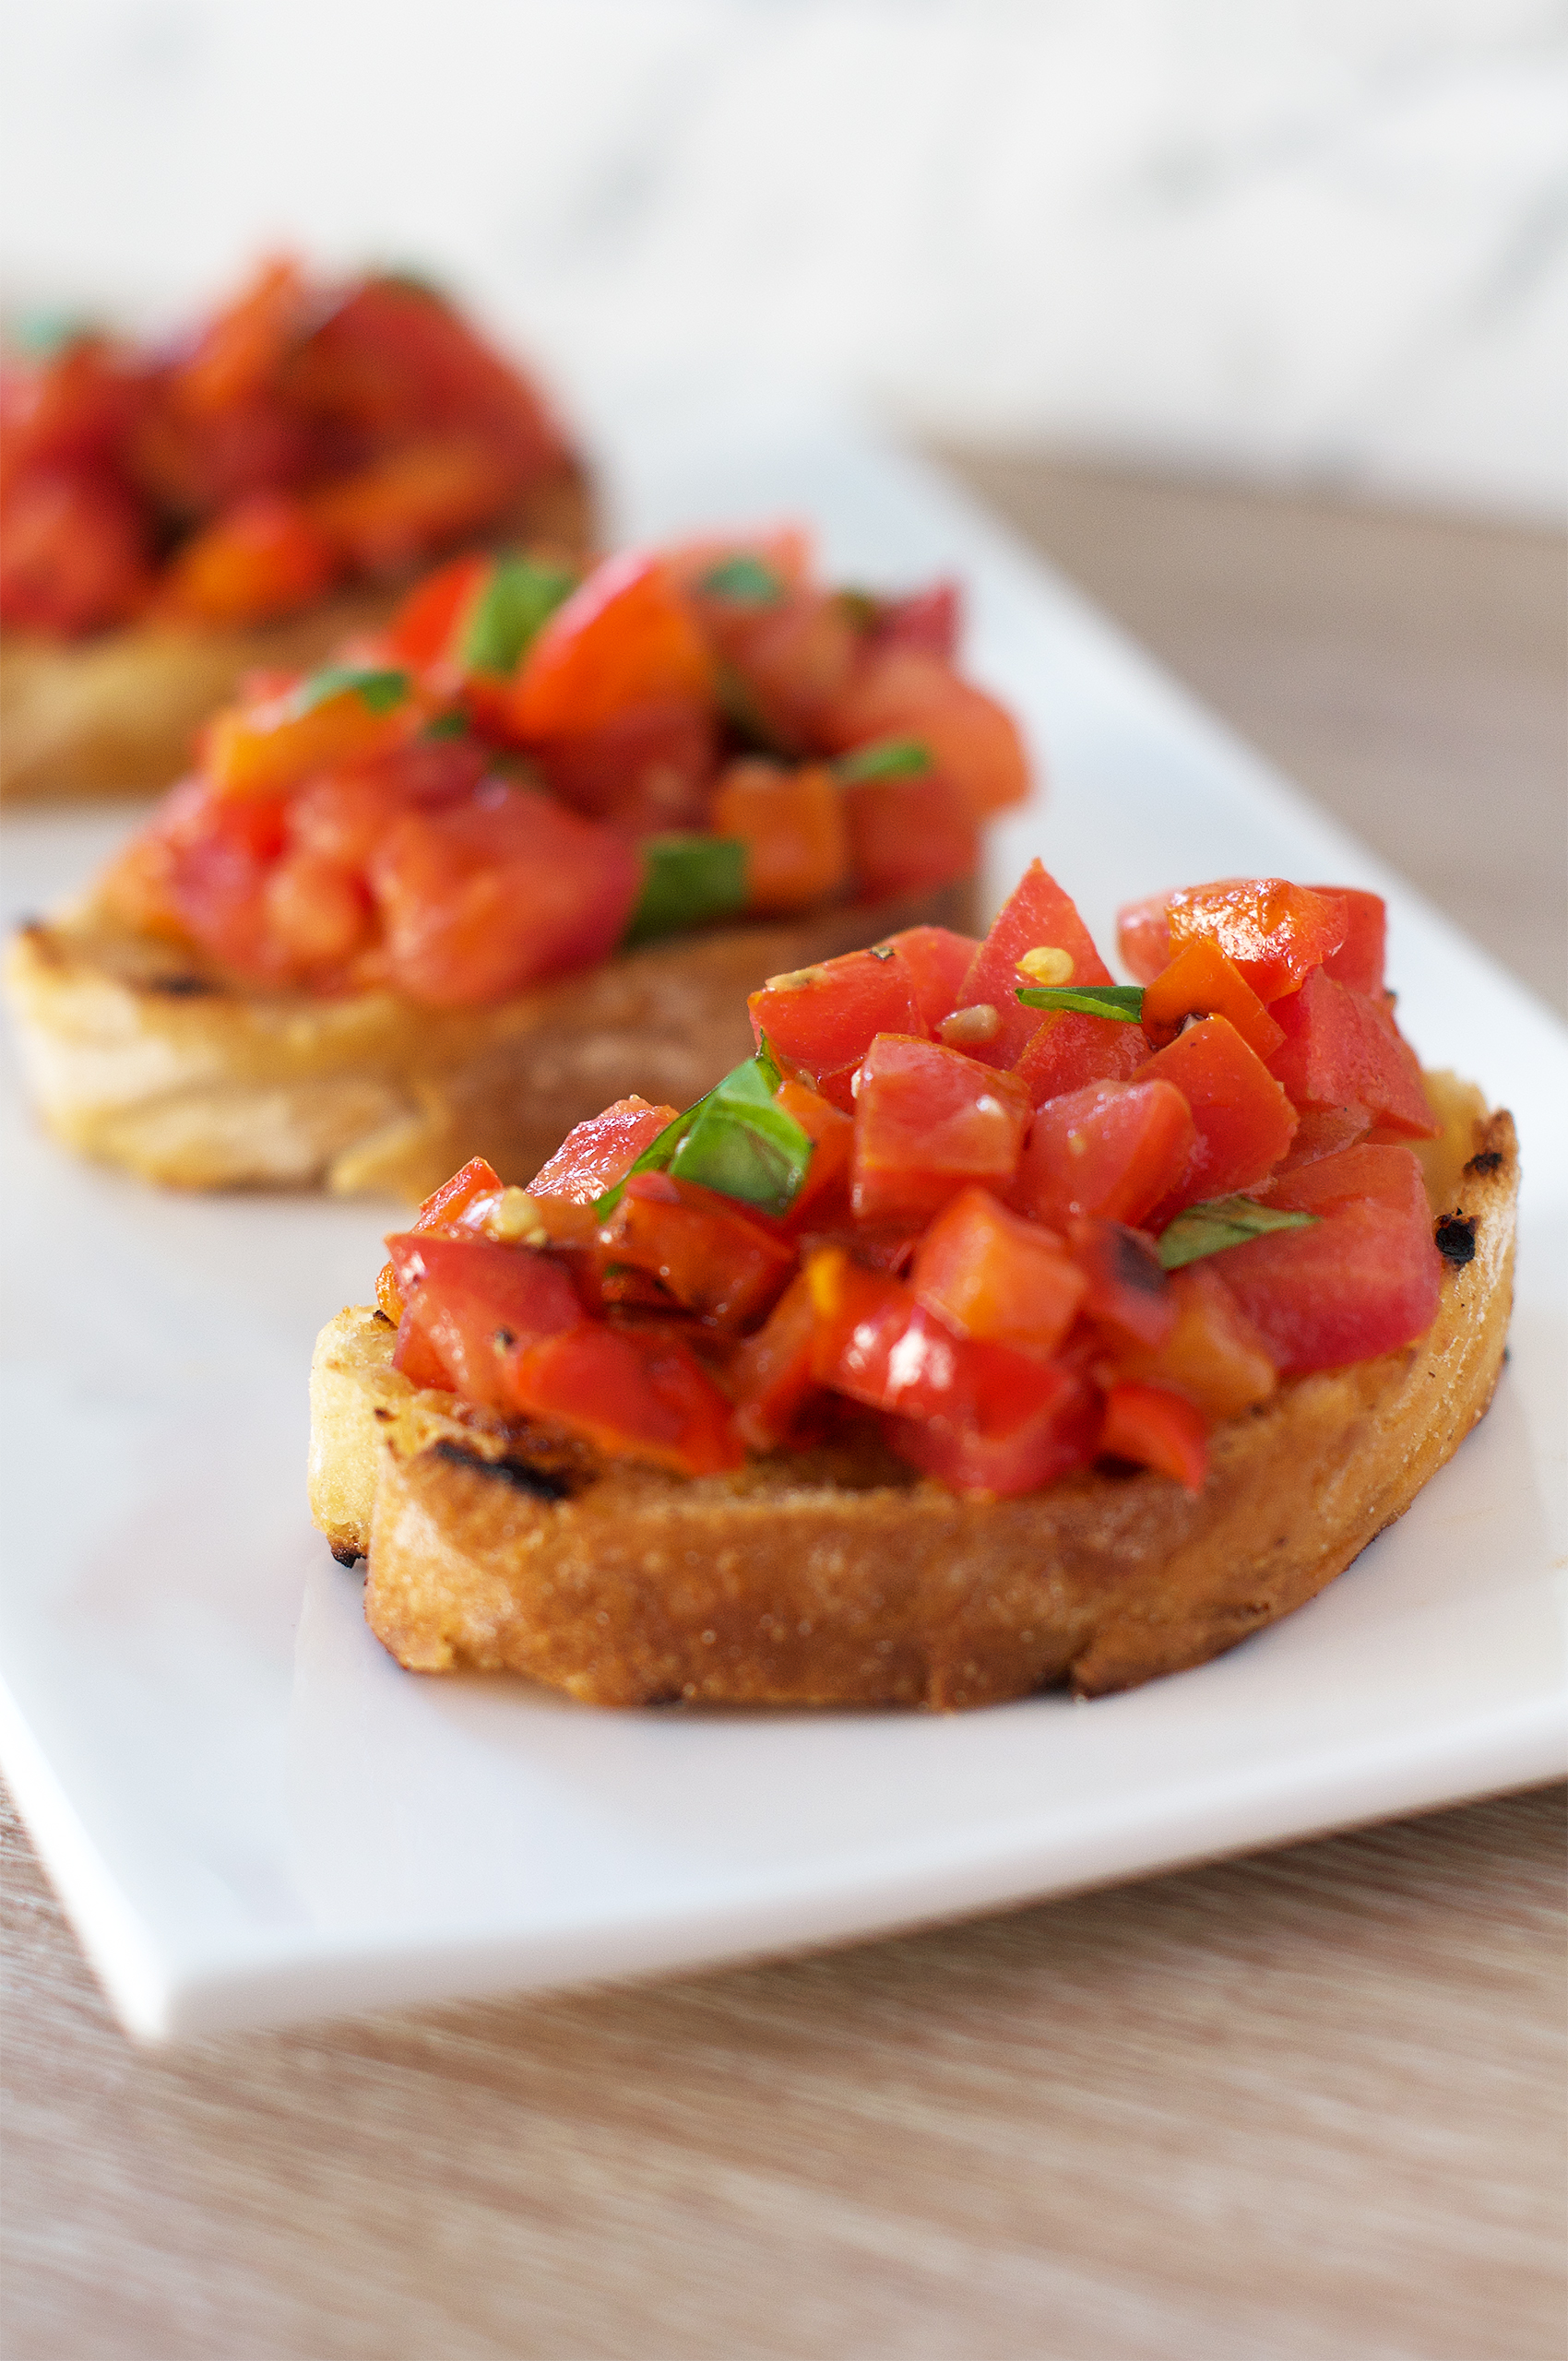 Spicy tomato and red pepper bruschetta with basil recipe